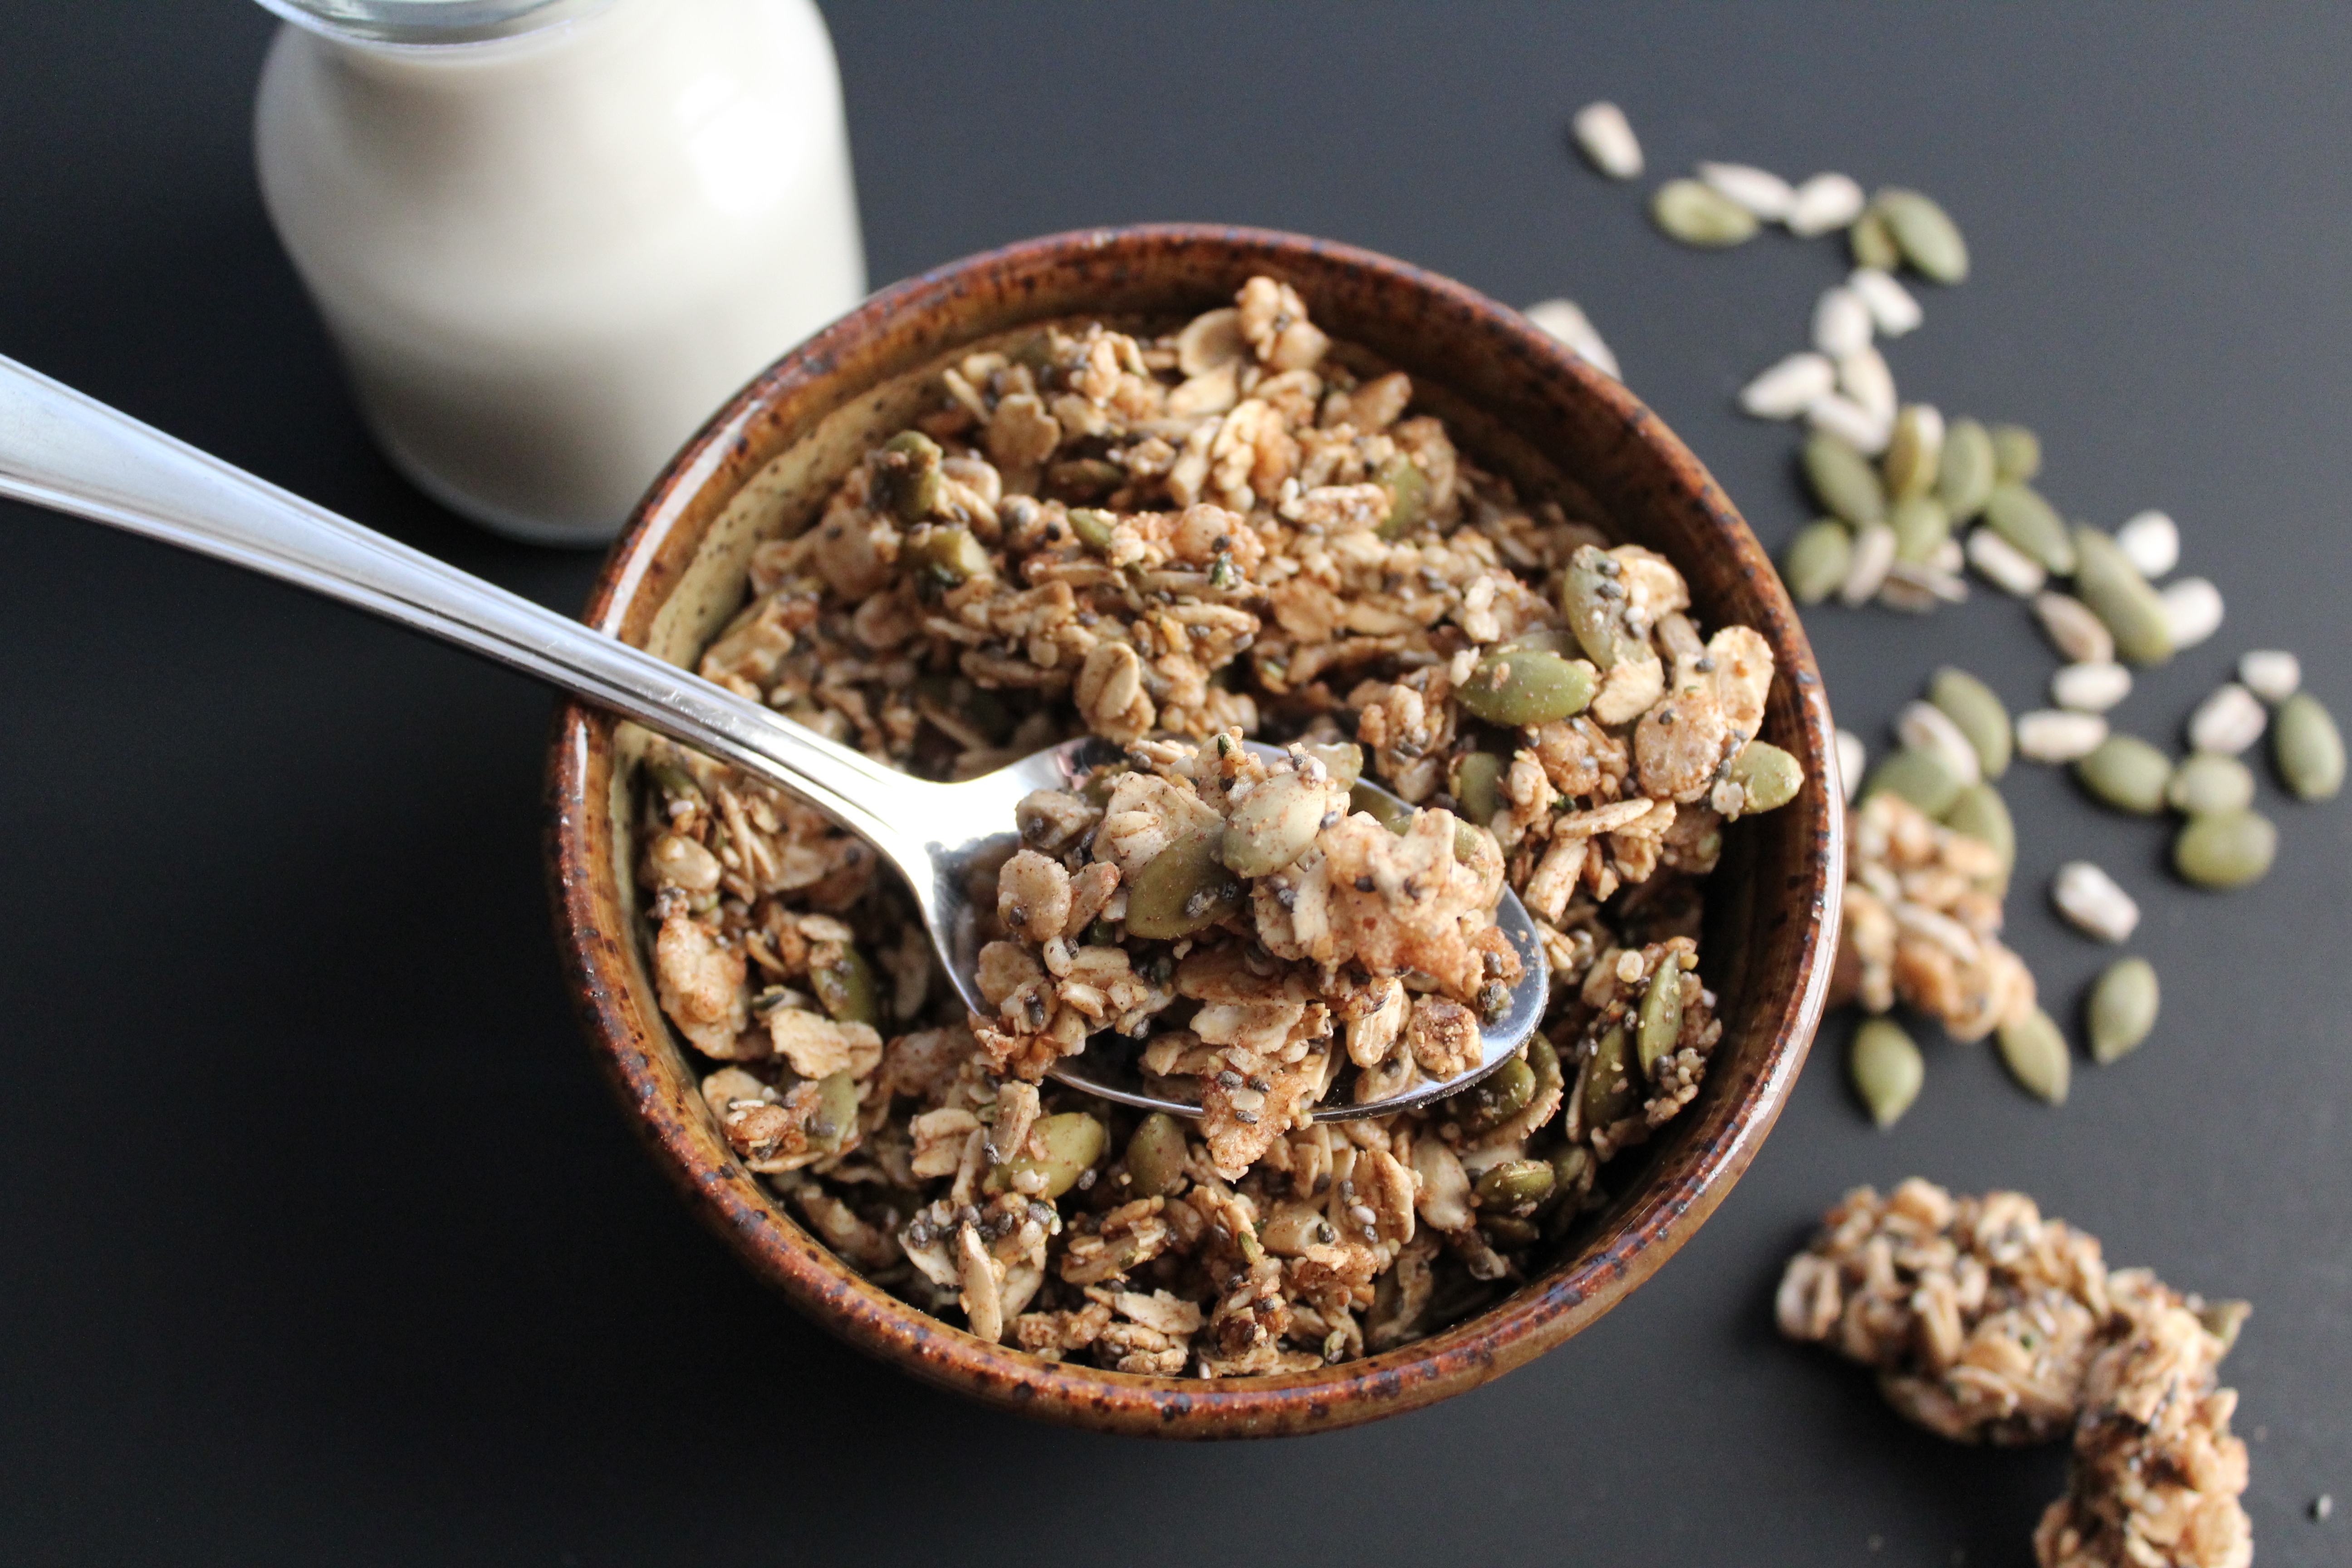 So many health benefits in this Chunky Super Seed Granola! Nut free! YUM!